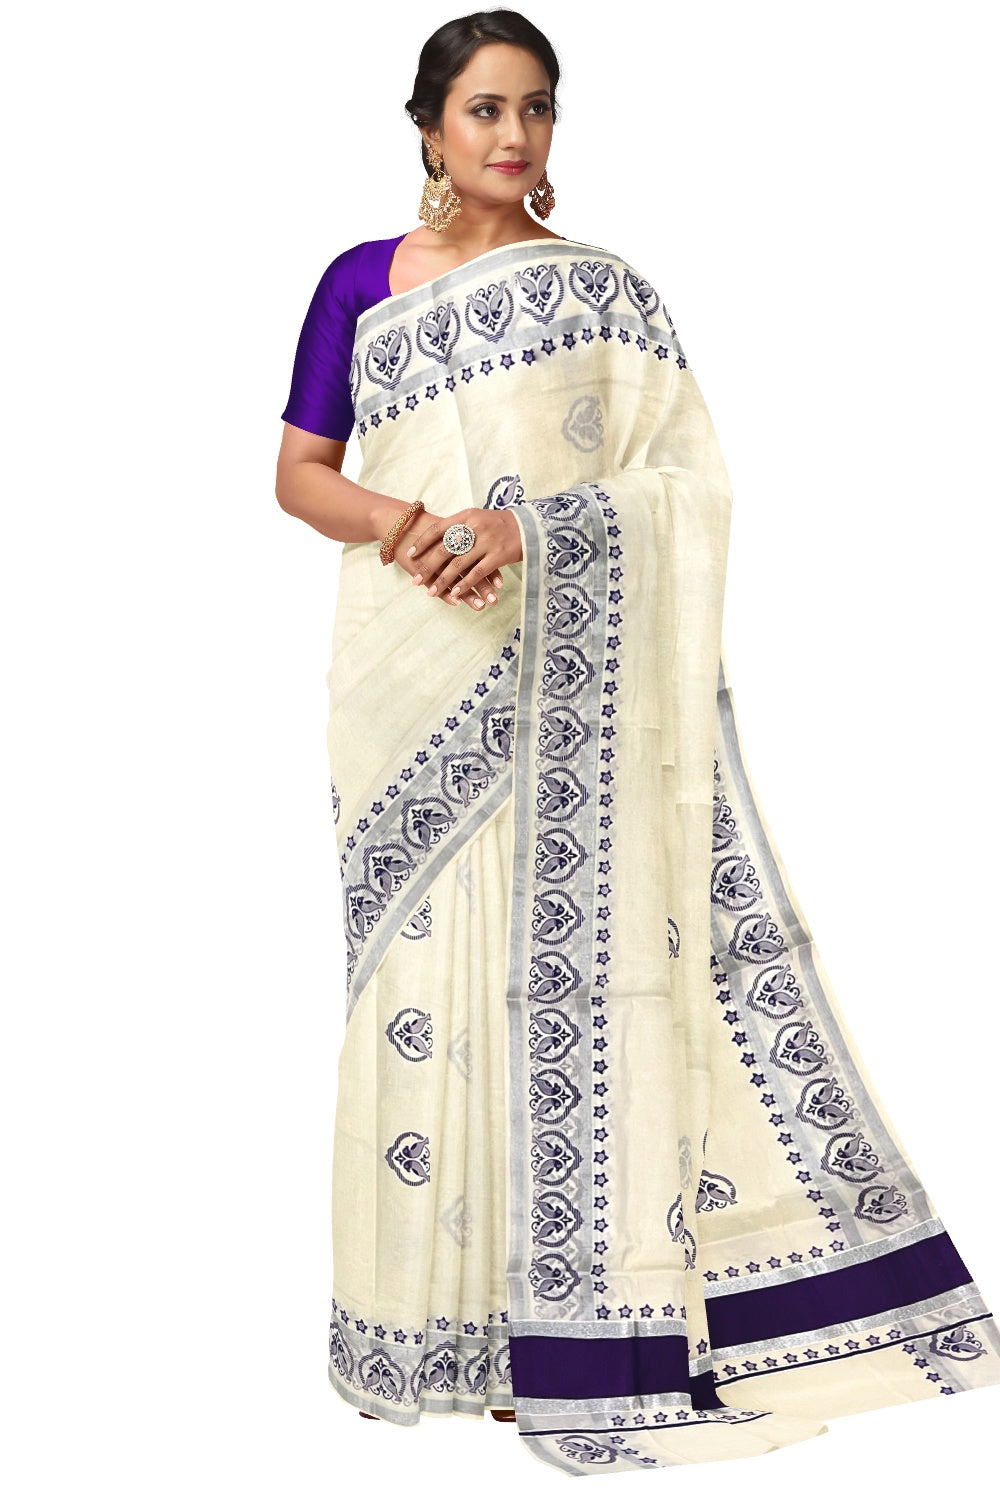 Pure Cotton Kerala Saree with Silver Kasavu Violet Block Prints on Border and Tassels Works